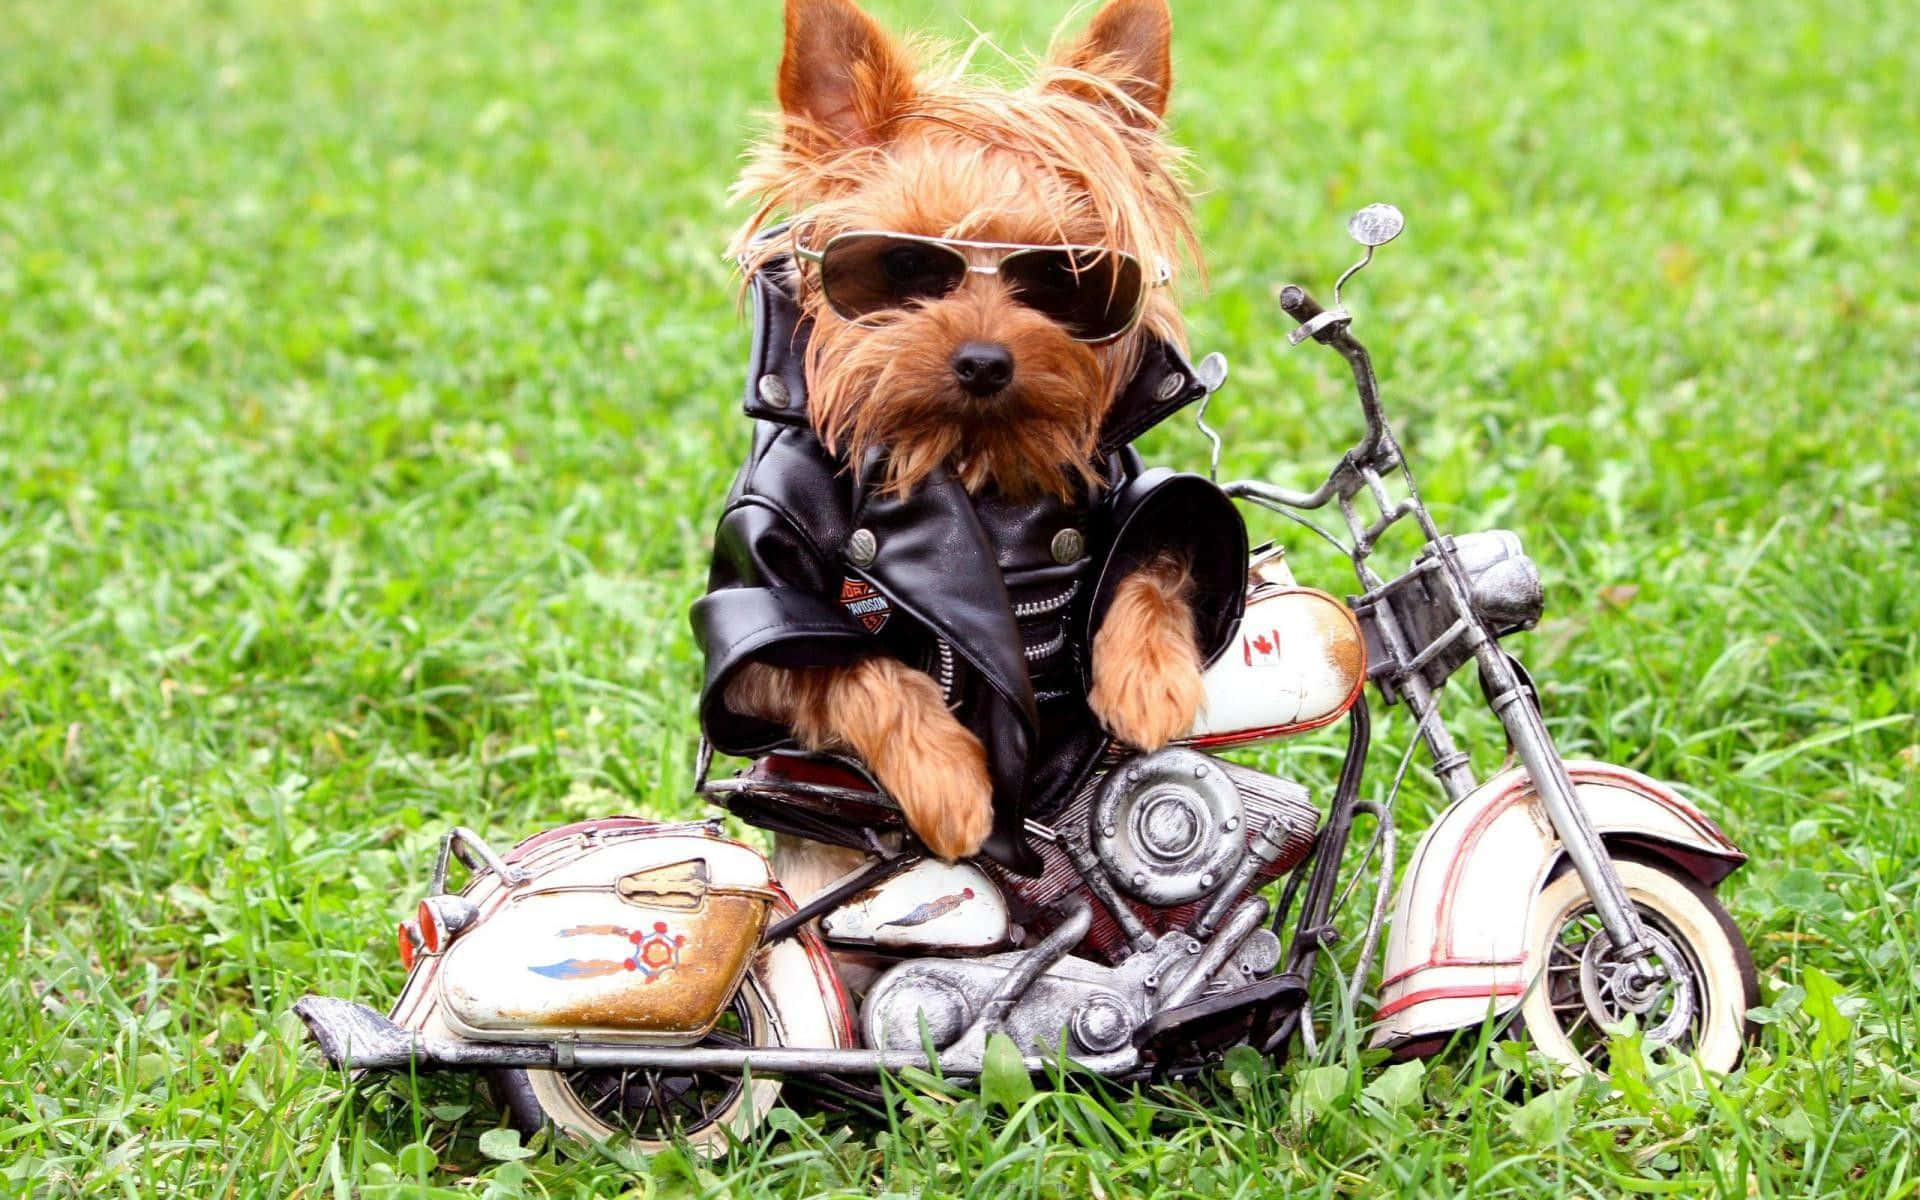 Funny Dog With Toy Motorcycle Wallpaper